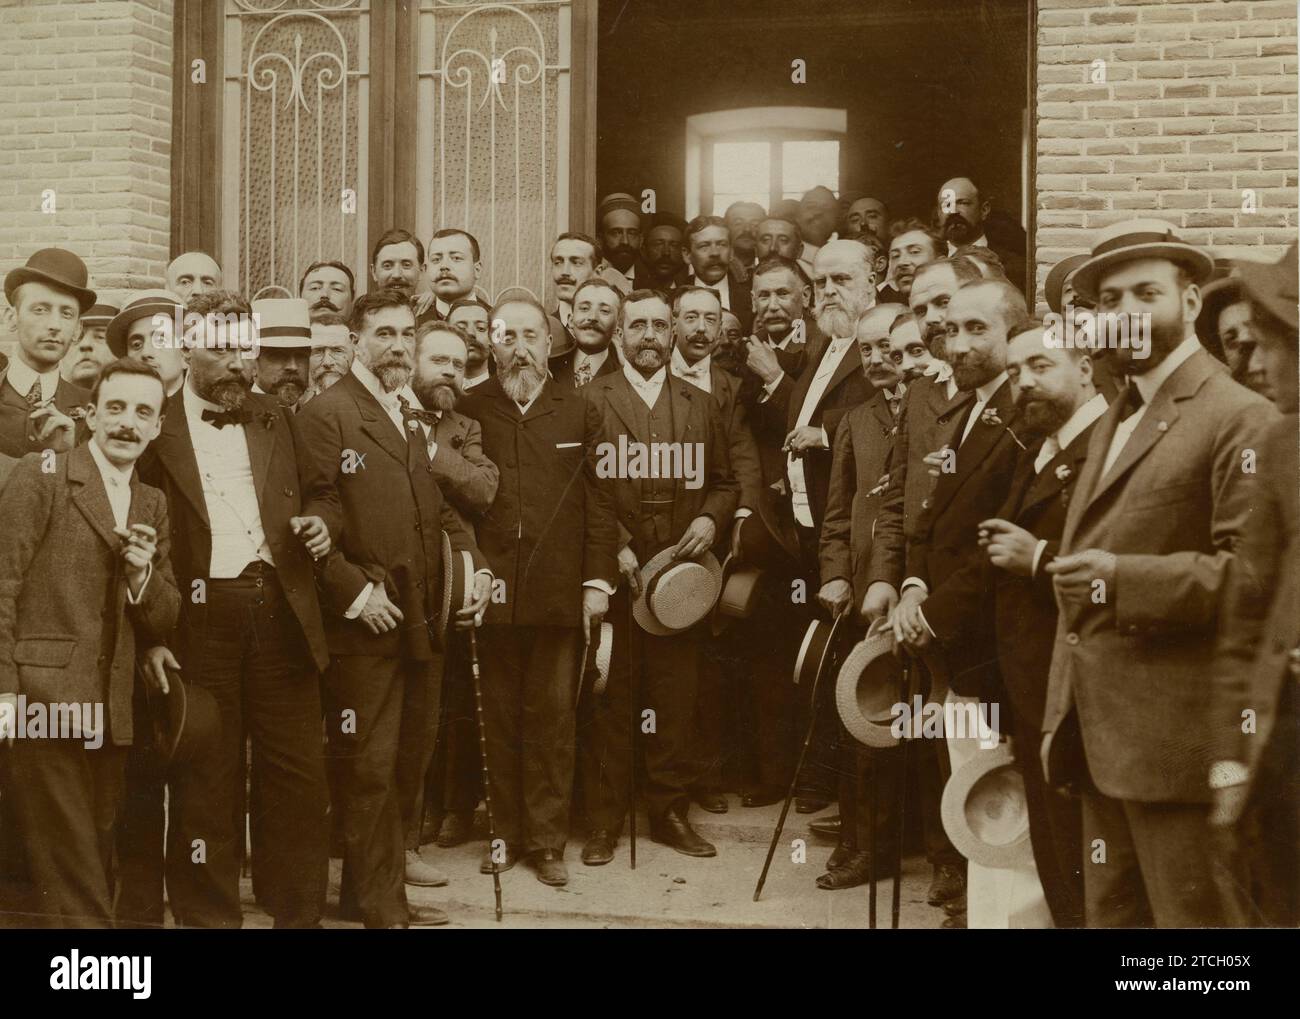 Madrid, 06/25/1906. Banquet given in La Huerta to the distinguished Querol on the occasion of having obtained the medal of honor in the last Fine Arts exhibition. Querol (x) leaving La Huerta with the diners, among whom were Messrs. Galdós, Canalejas, Marquis del Vadillo, Roselló, Pulido, Beistegui and other illustrious men. Credit: Album / Archivo ABC Stock Photo